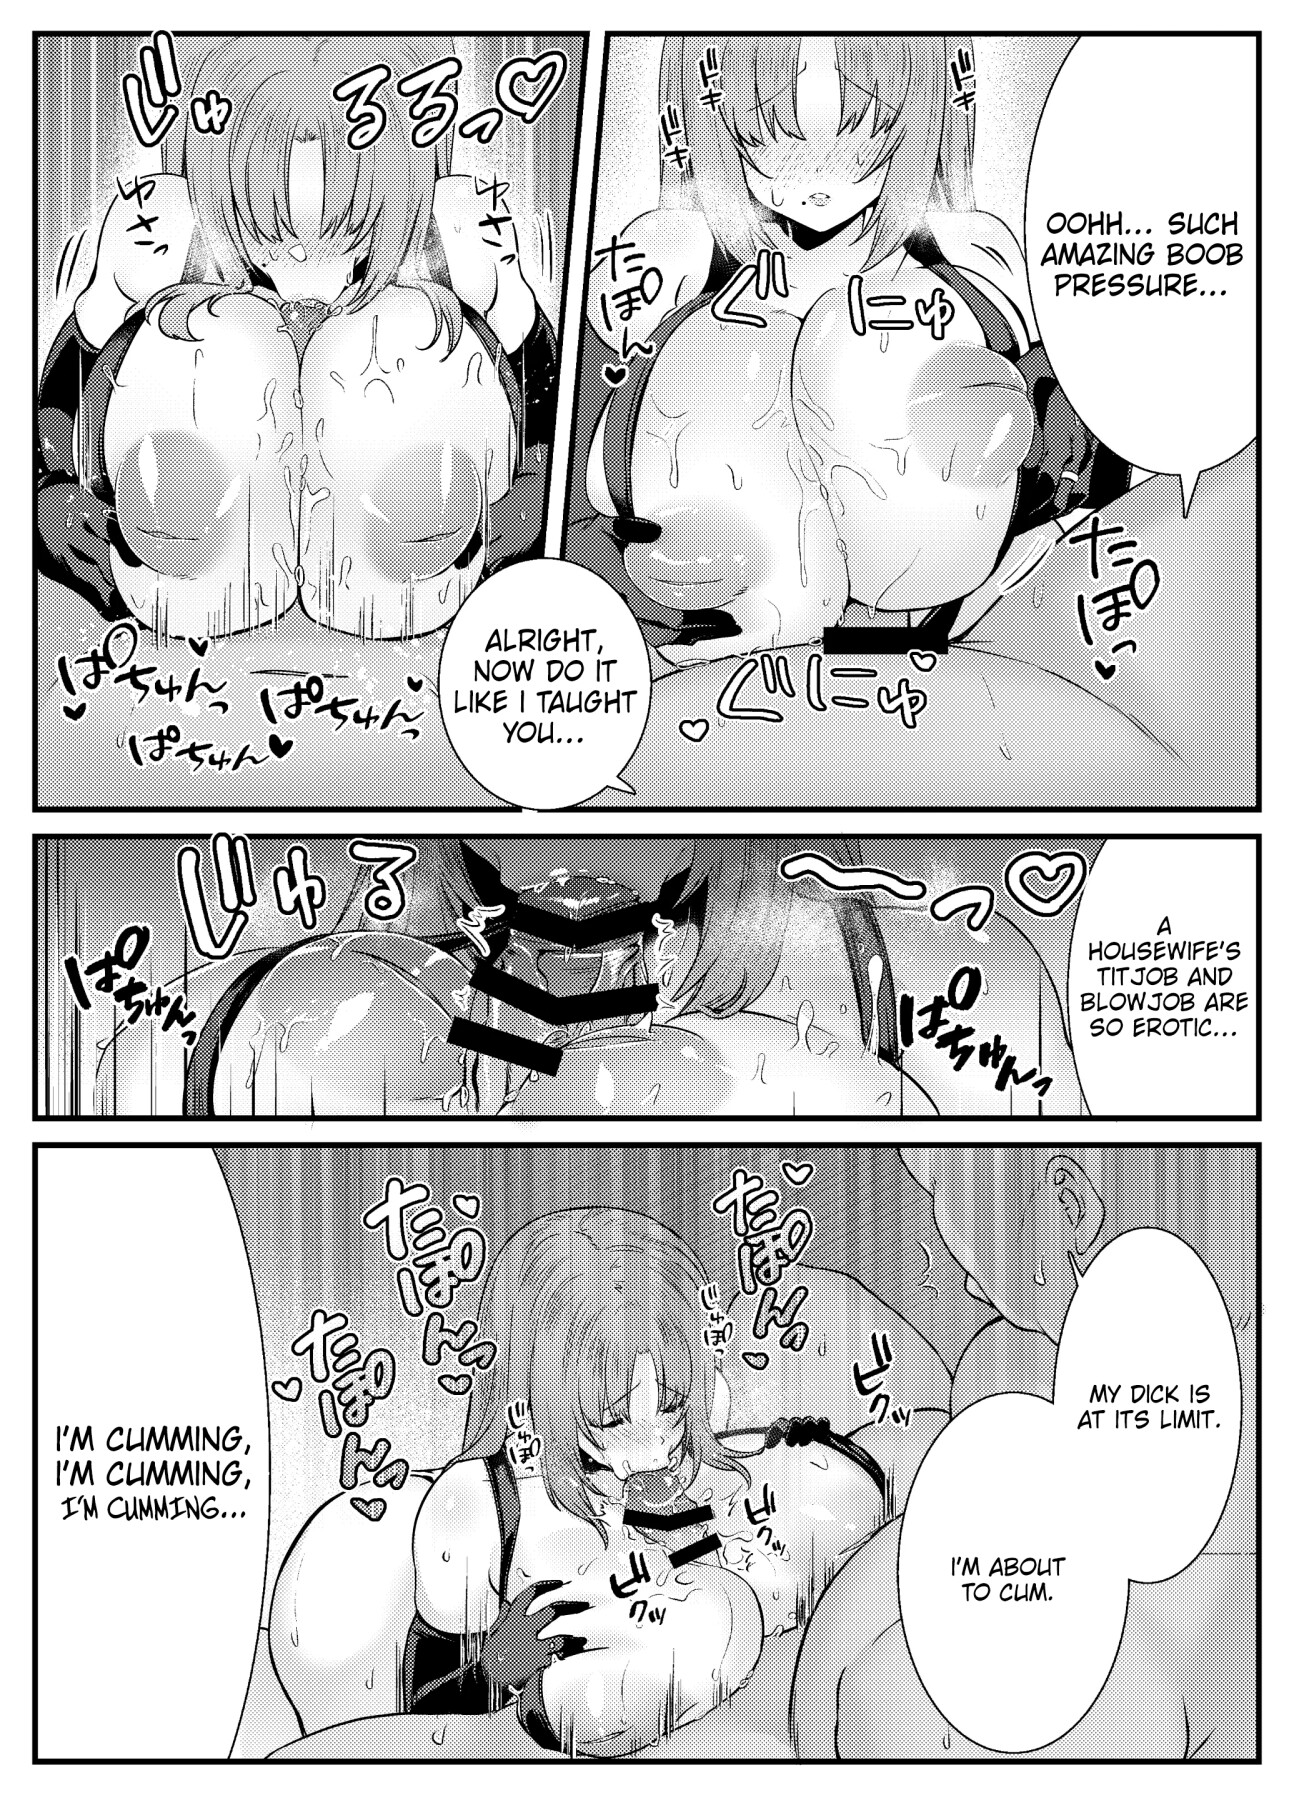 hentai manga Internal Orgasm Lesson -The Housewife Took a Real, Bareback Sex Lesson with a Another man for her Husband-